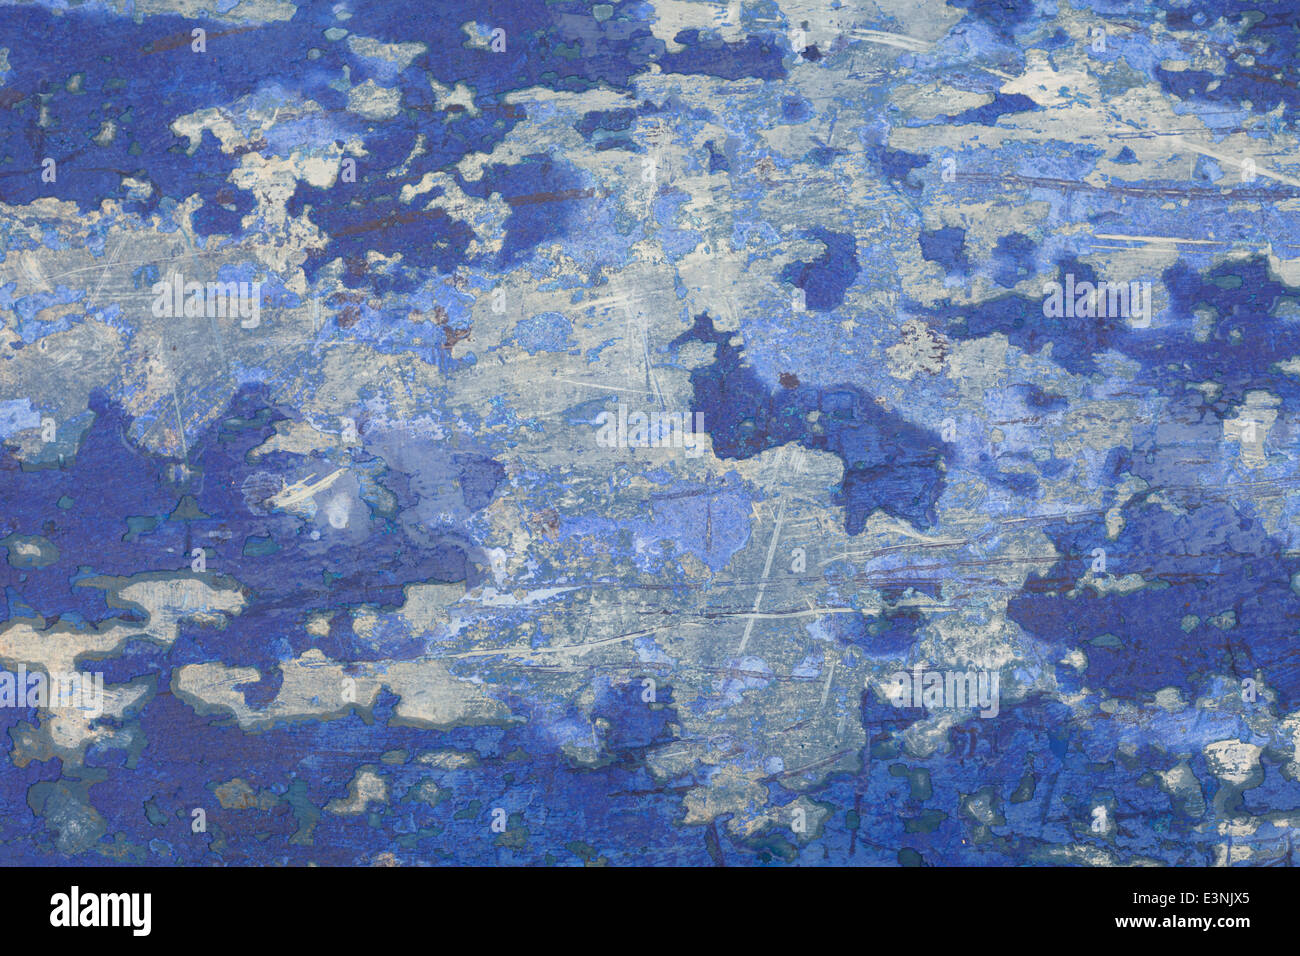 Chipped blue paint on upturned boat hull Stock Photo